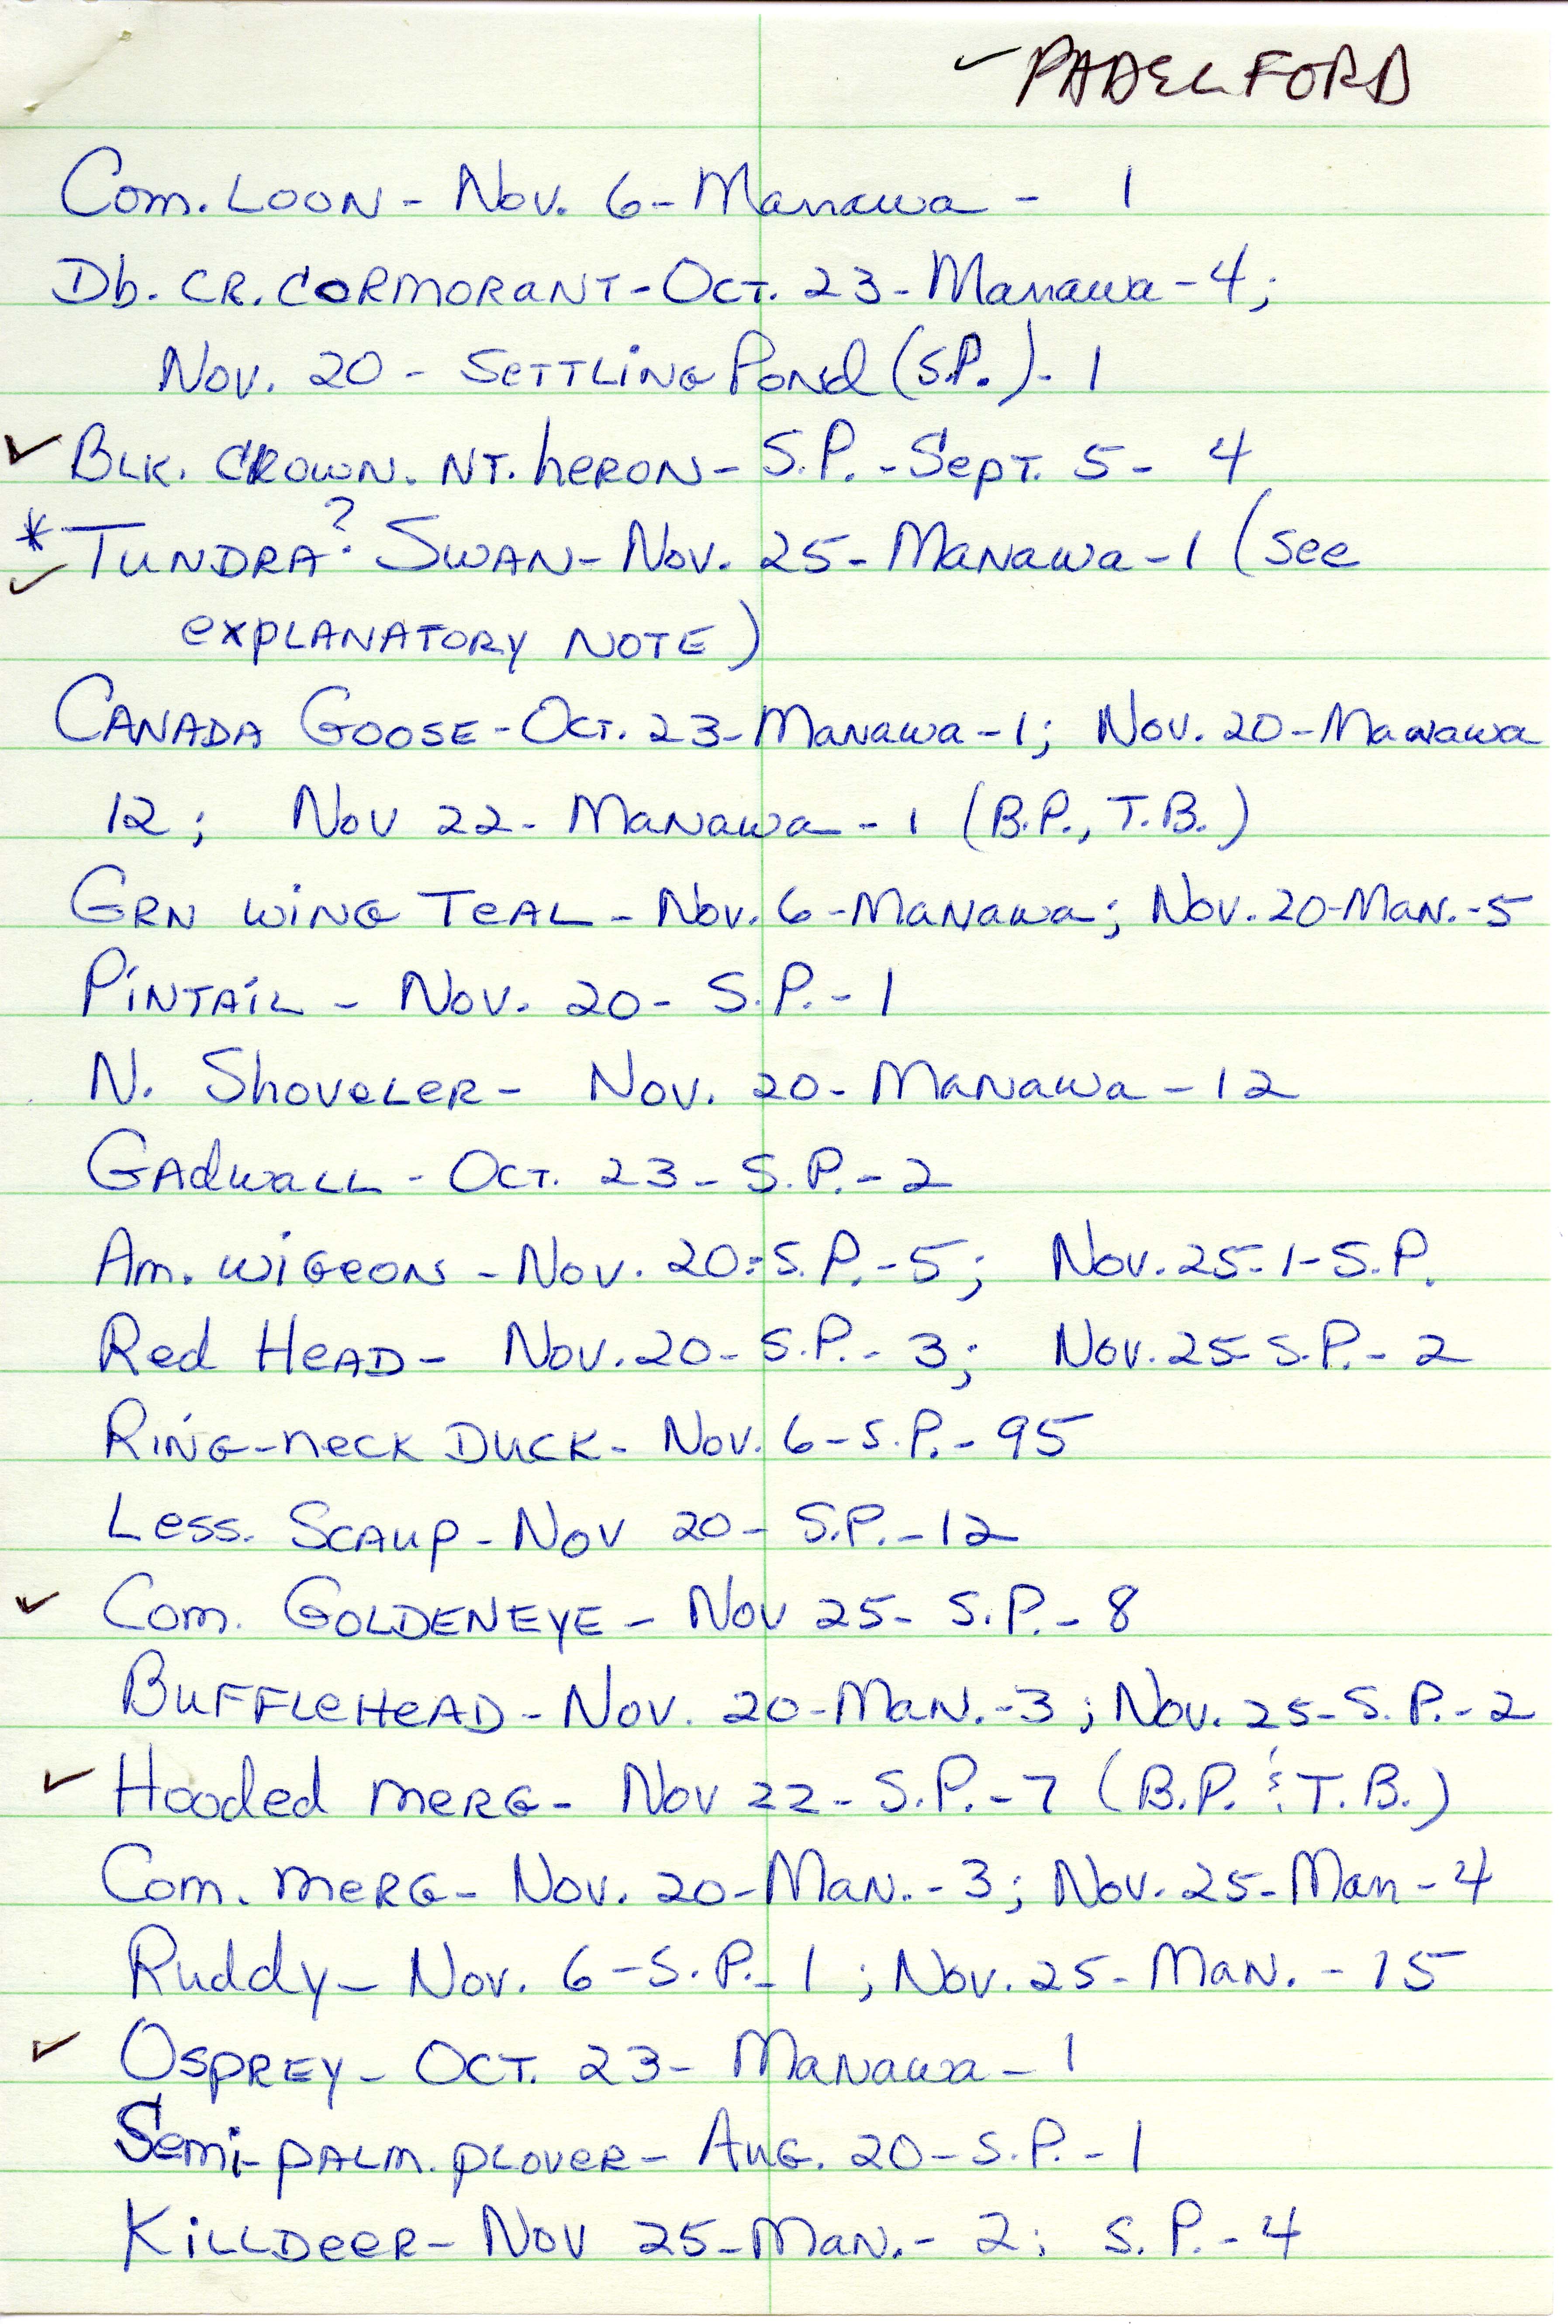 Annotated bird sighting list for Fall 1983 compiled by Babs Padelford